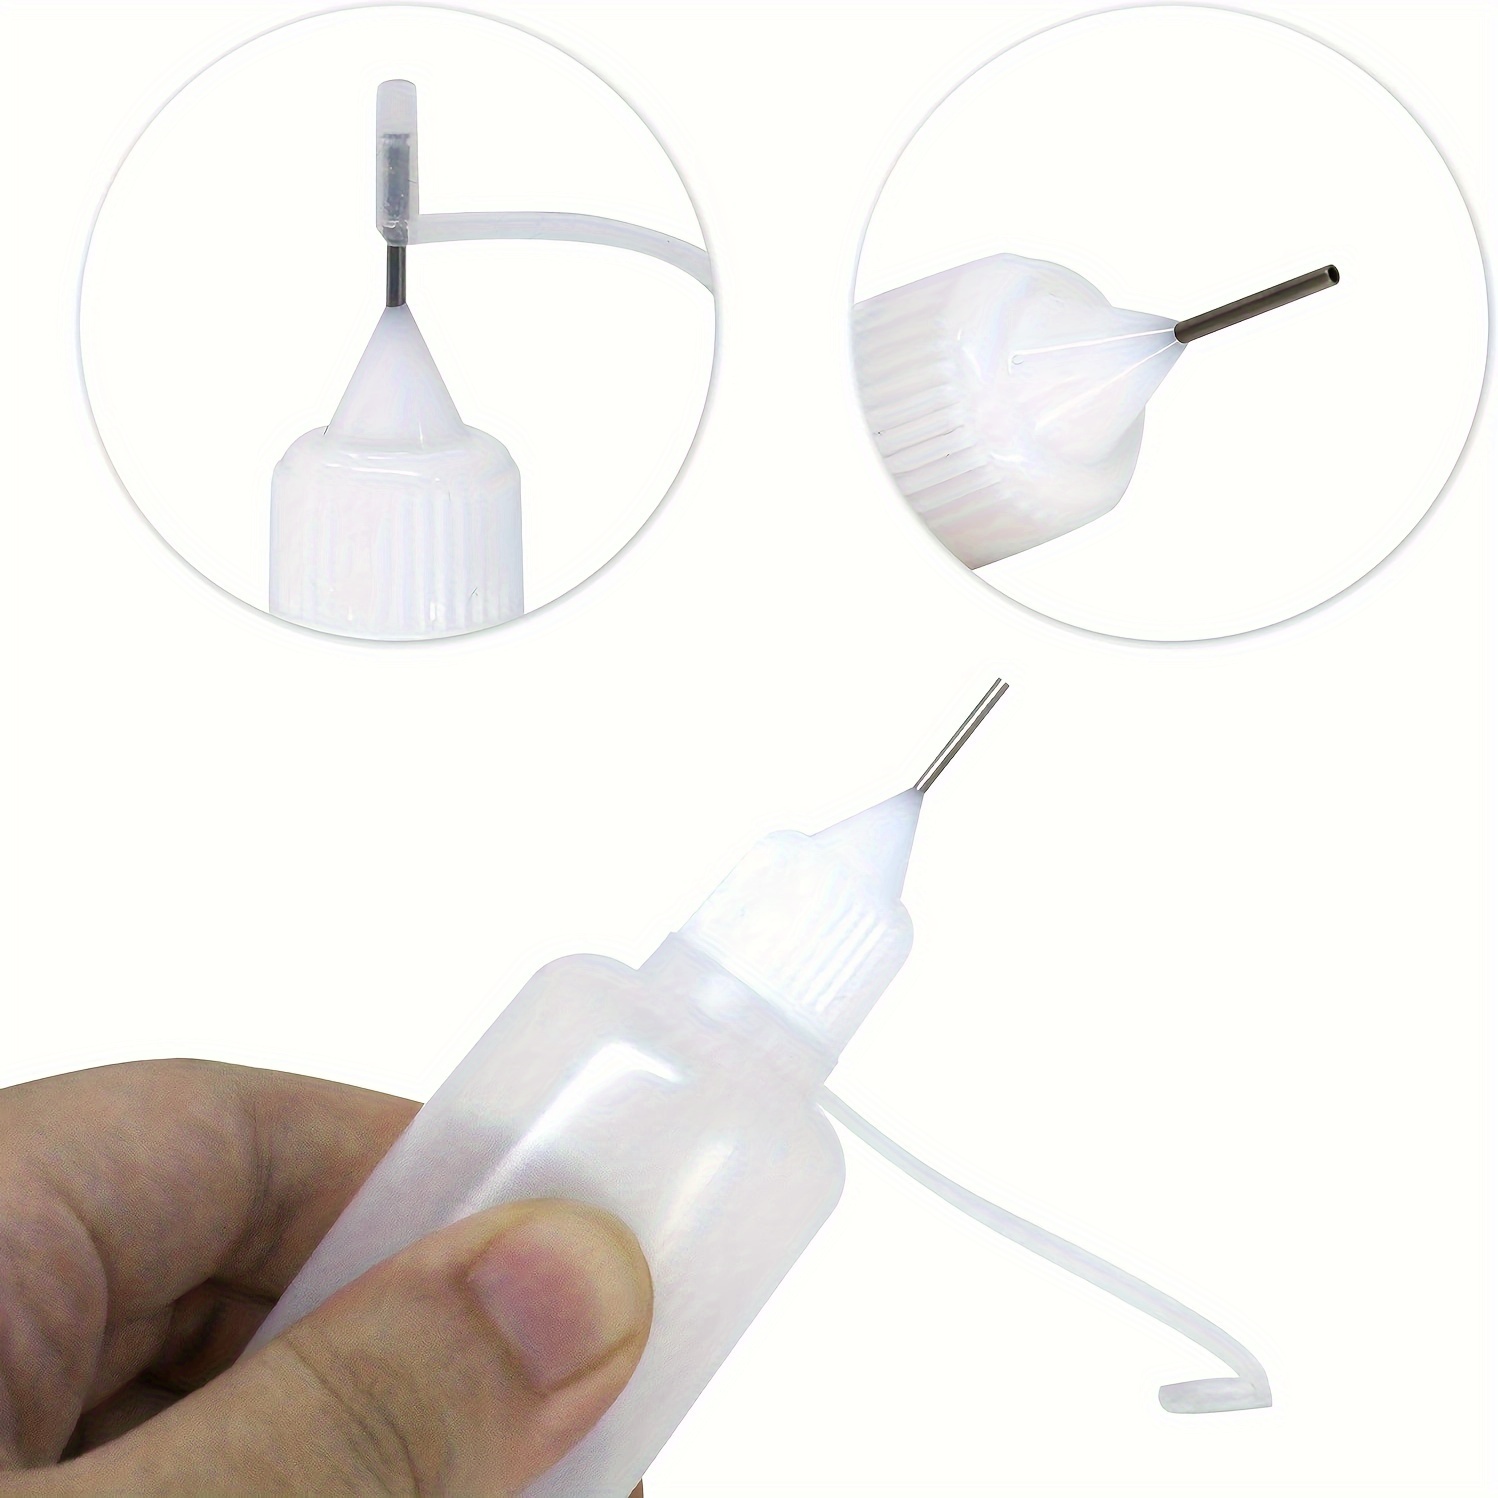  Precision Needle Tip Glue Applicator Bottle with Bent Blunt  Needle Tip and Tapered TT Needle for Oil, Adhesive, Liquid : Arts, Crafts &  Sewing